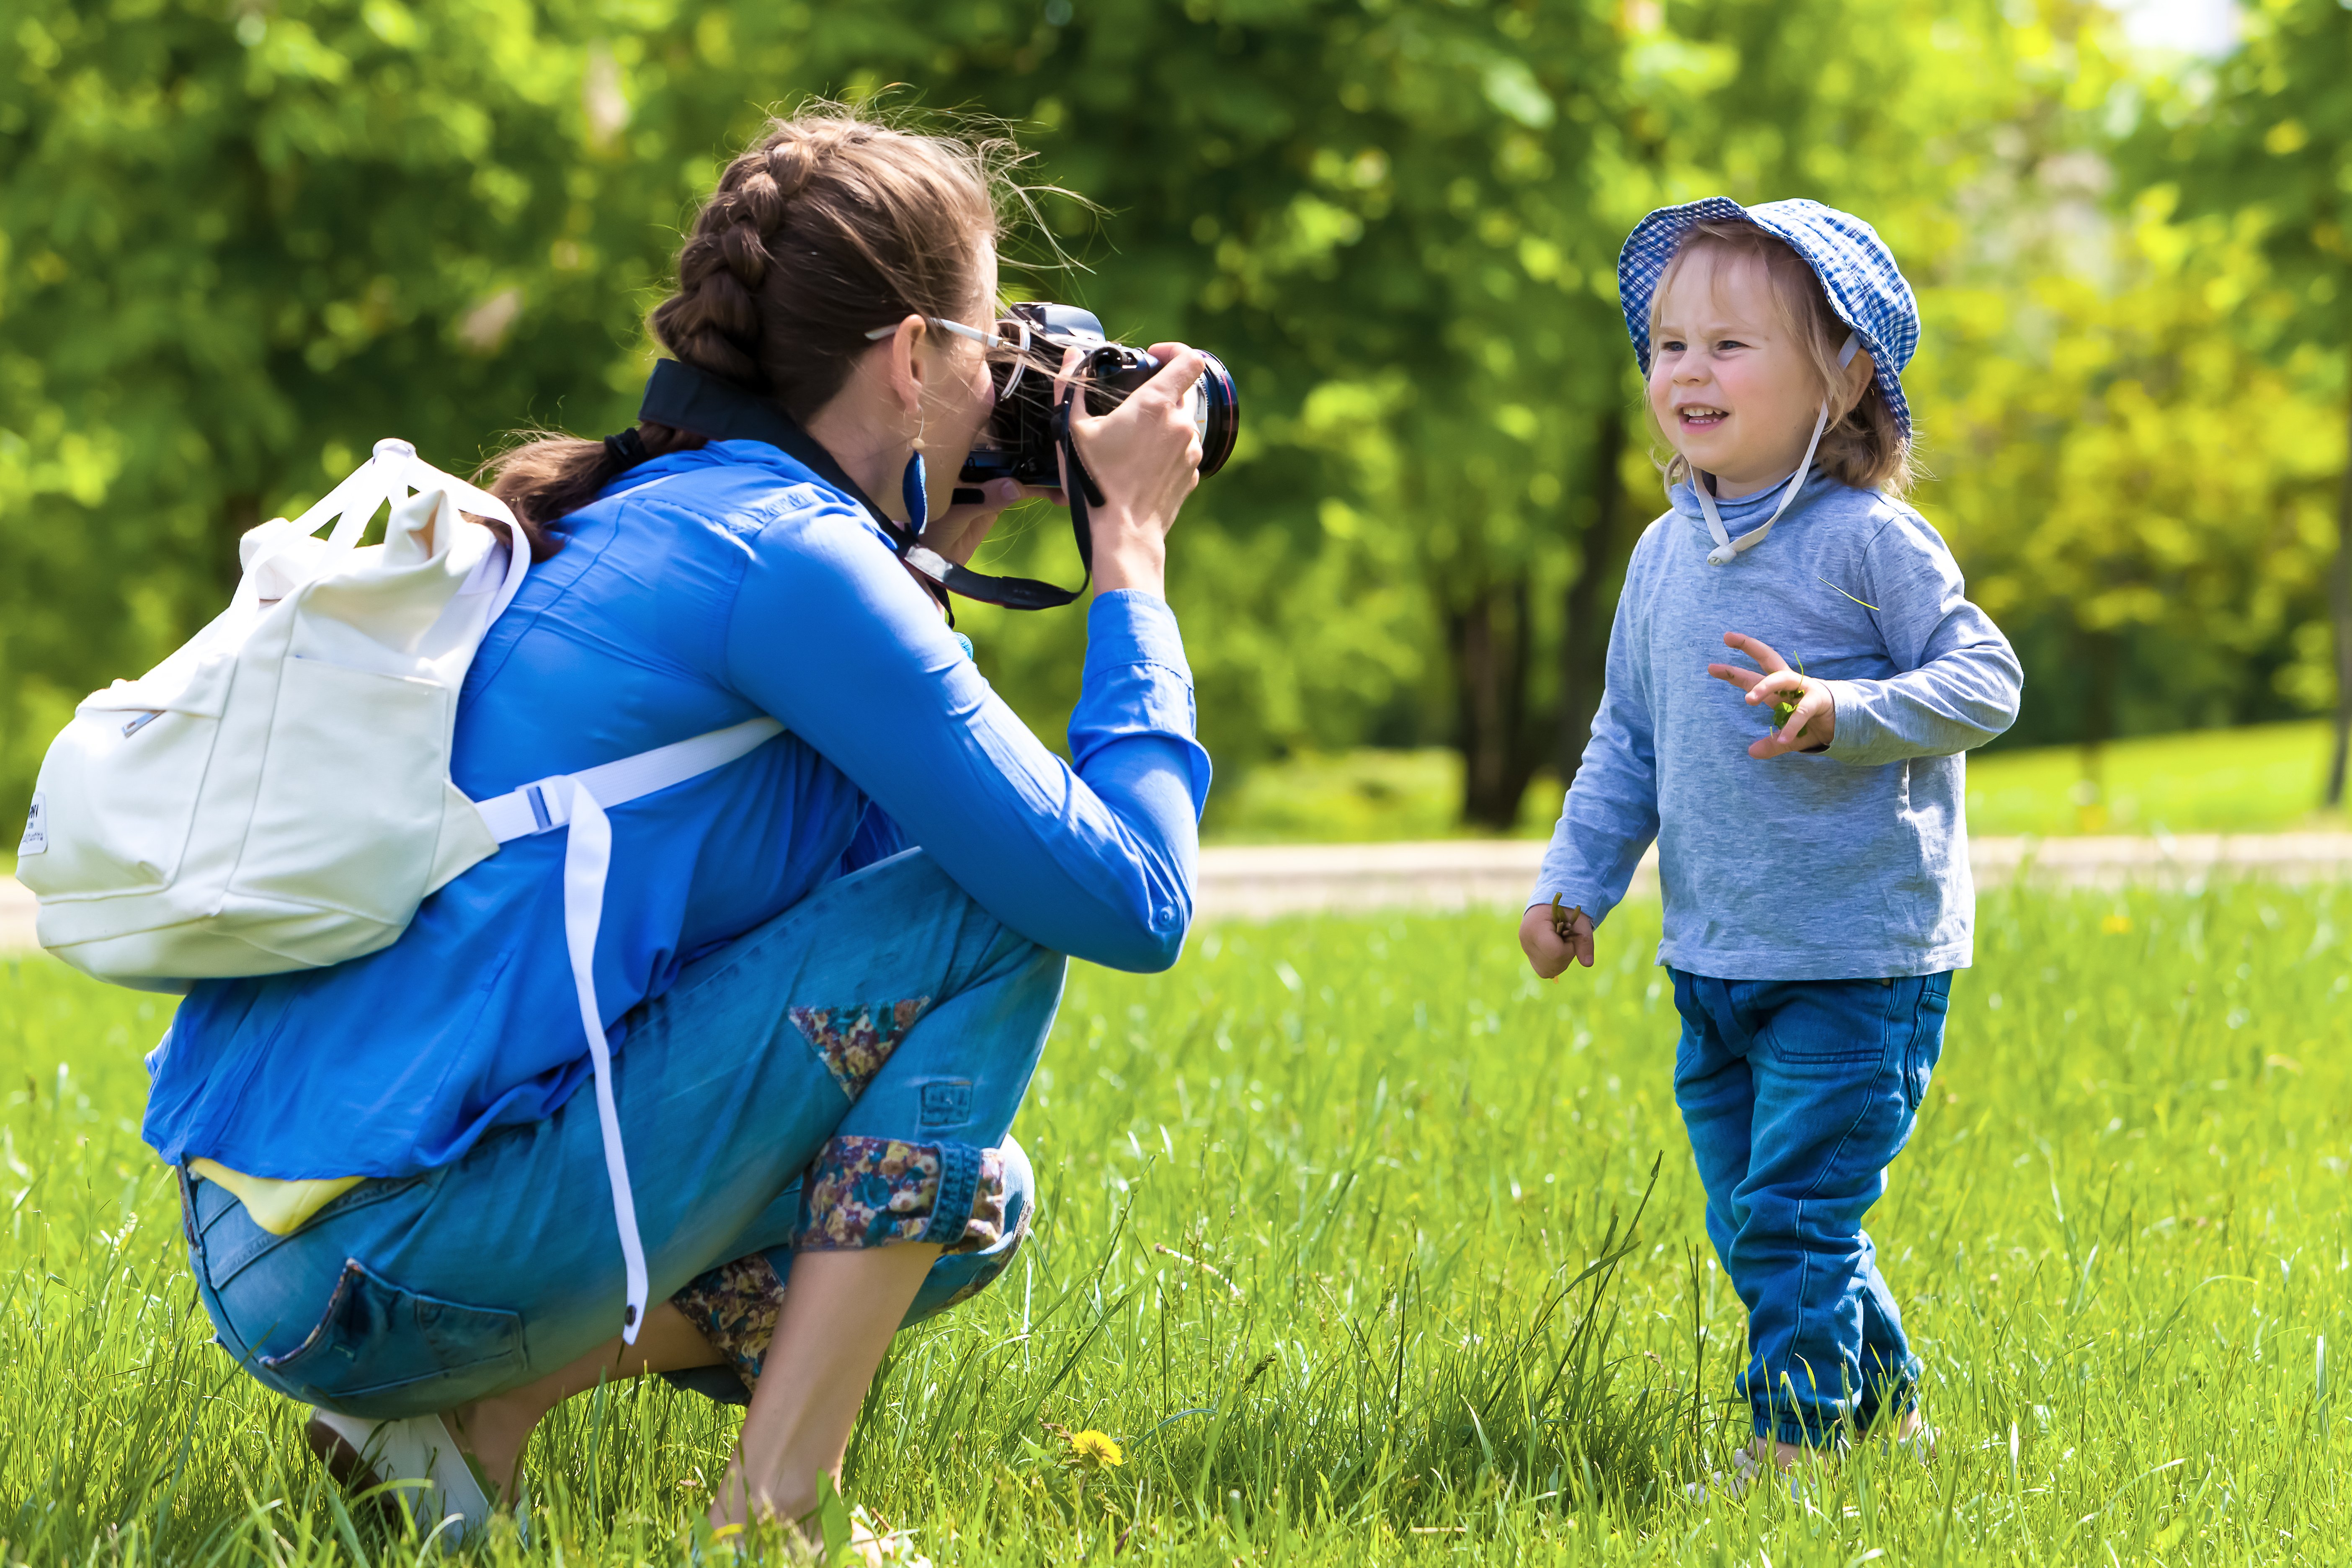 Phototips-mother_child taking photo outside outdoors grass mom child girl daughter photography photo